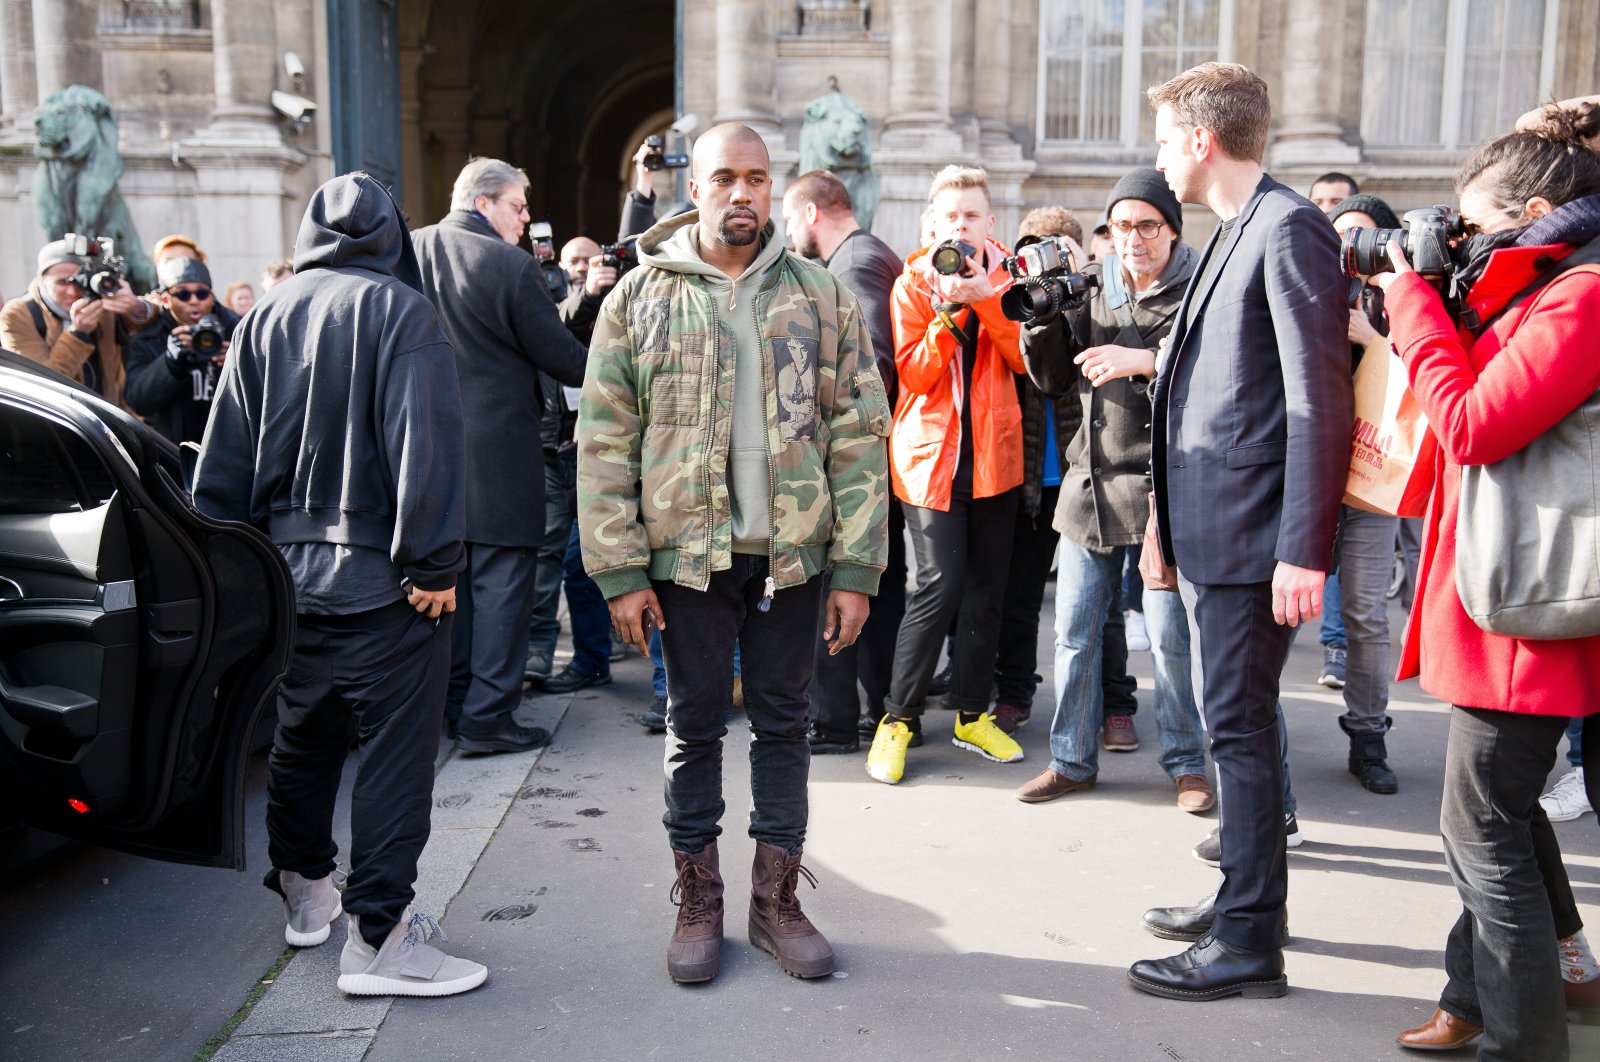 Kanye West posing for photographers in front of the Dries van noten fashion show, Paris, France, March 4, 2015. (Shutterstock Photo)